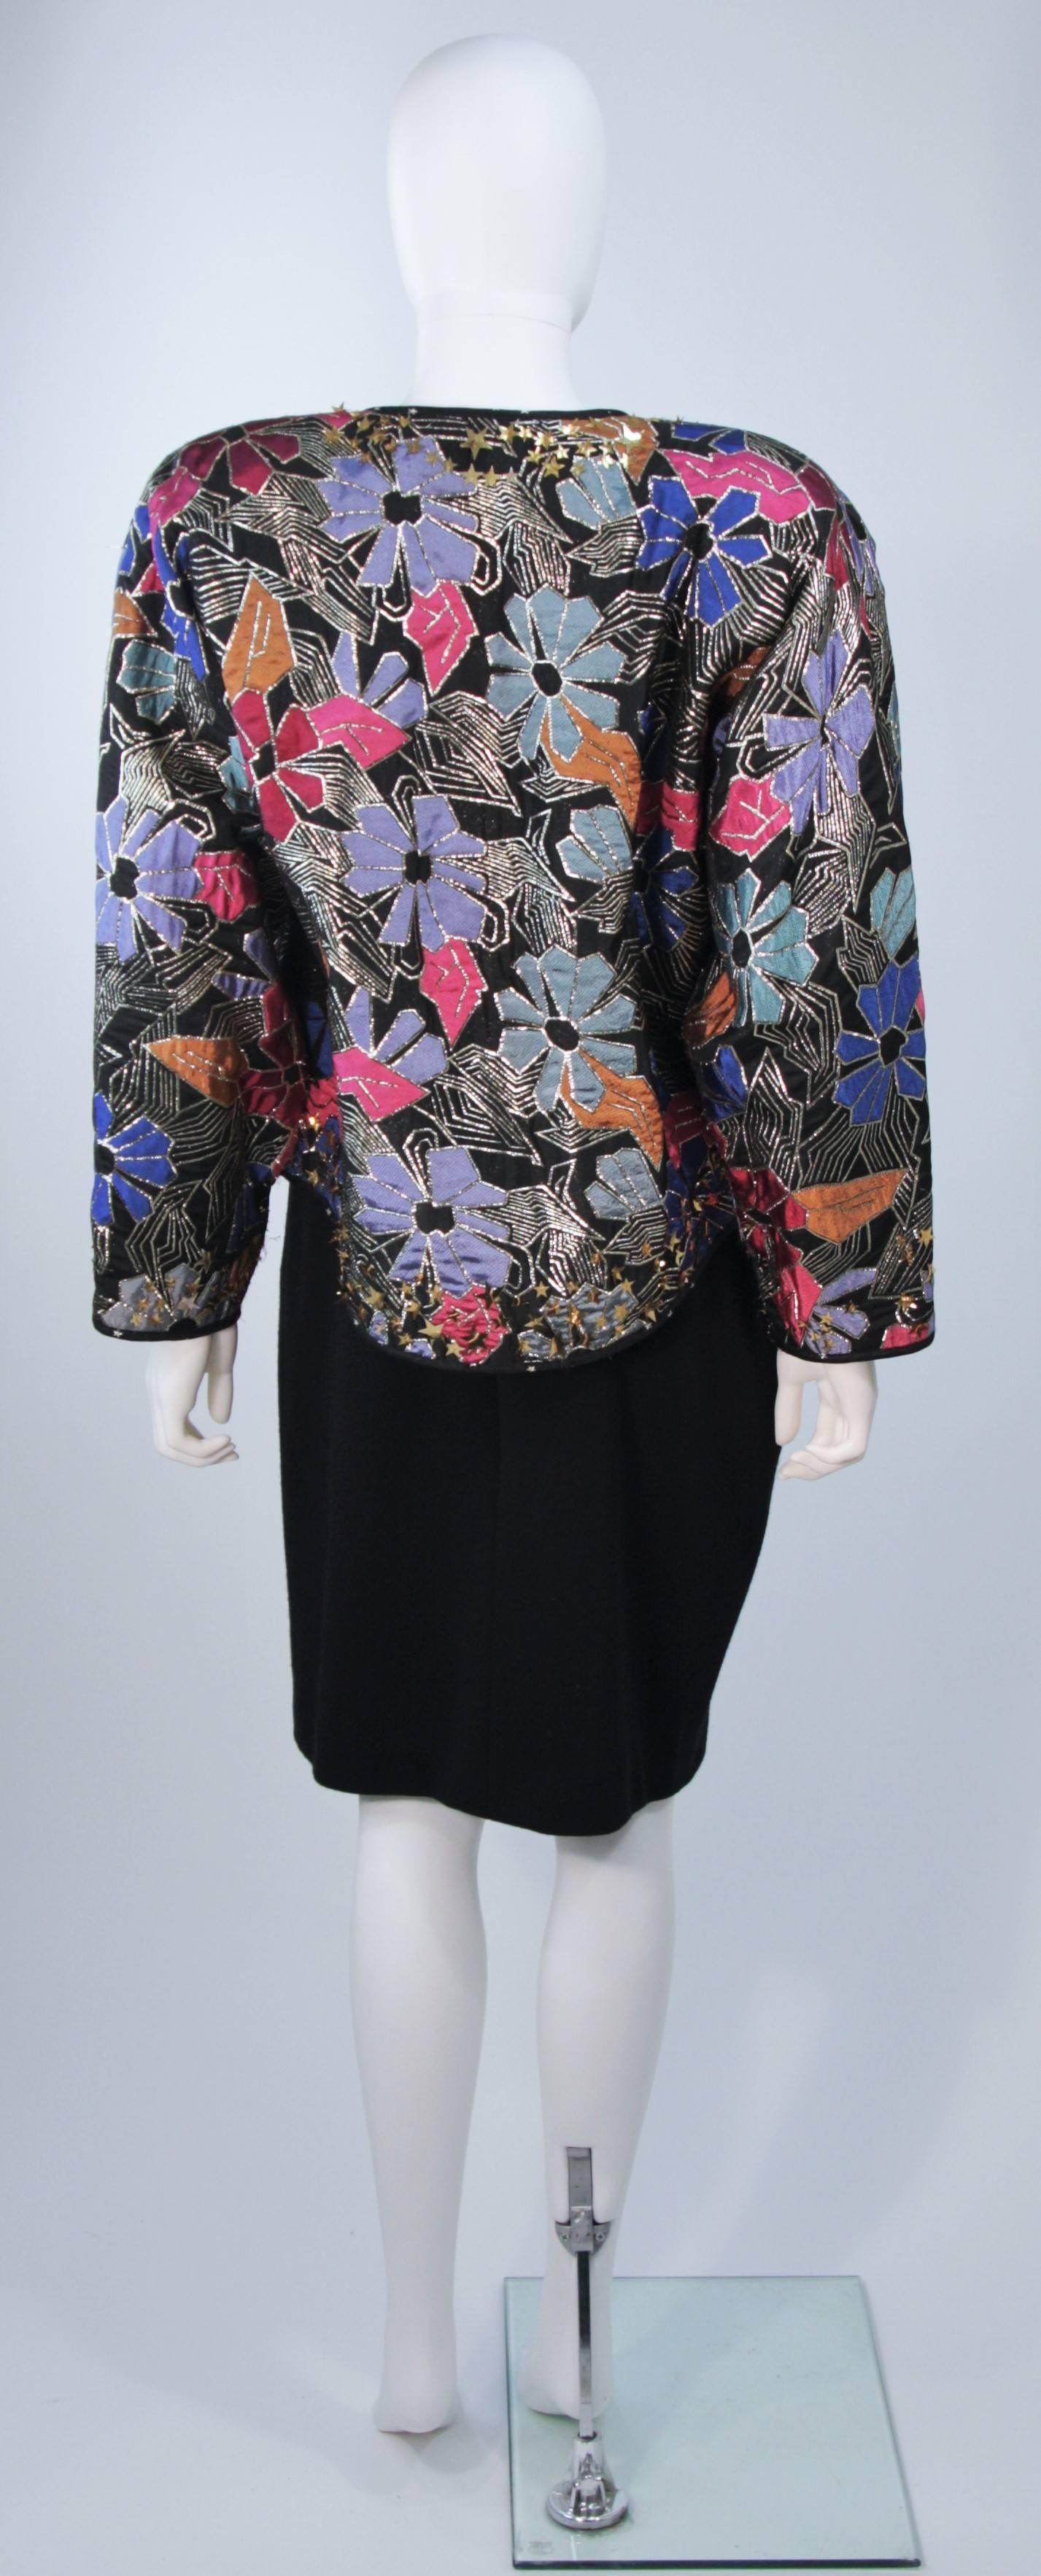 GEOFFREY BEENE COUTURE Reversible Embellished Jacket and Draped Dress Size 6-8 1